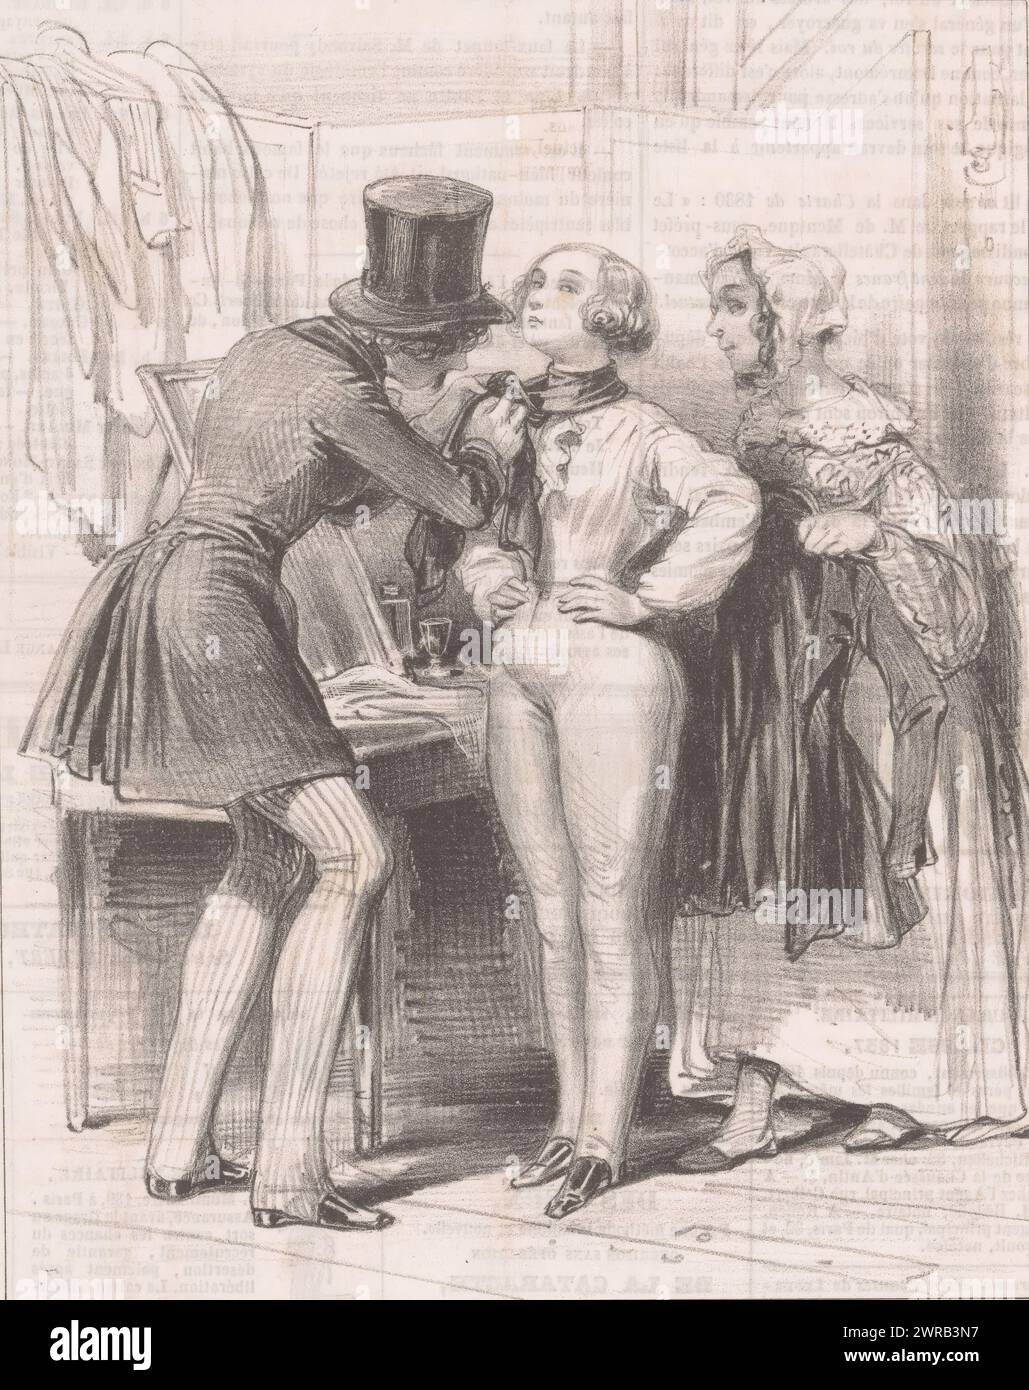 Actress gets dressed for her performance, Alfred ma p'tite Minette, dépêche-toi! (...) (title on object), Les coulisses (series title), Behind the scenes (series title on object), print maker: Paul Gavarni, printer: Aubert & Cie., publisher: Aubert & Cie., Paris, 1838, paper, height 334 mm × width 239 mm, print Stock Photo